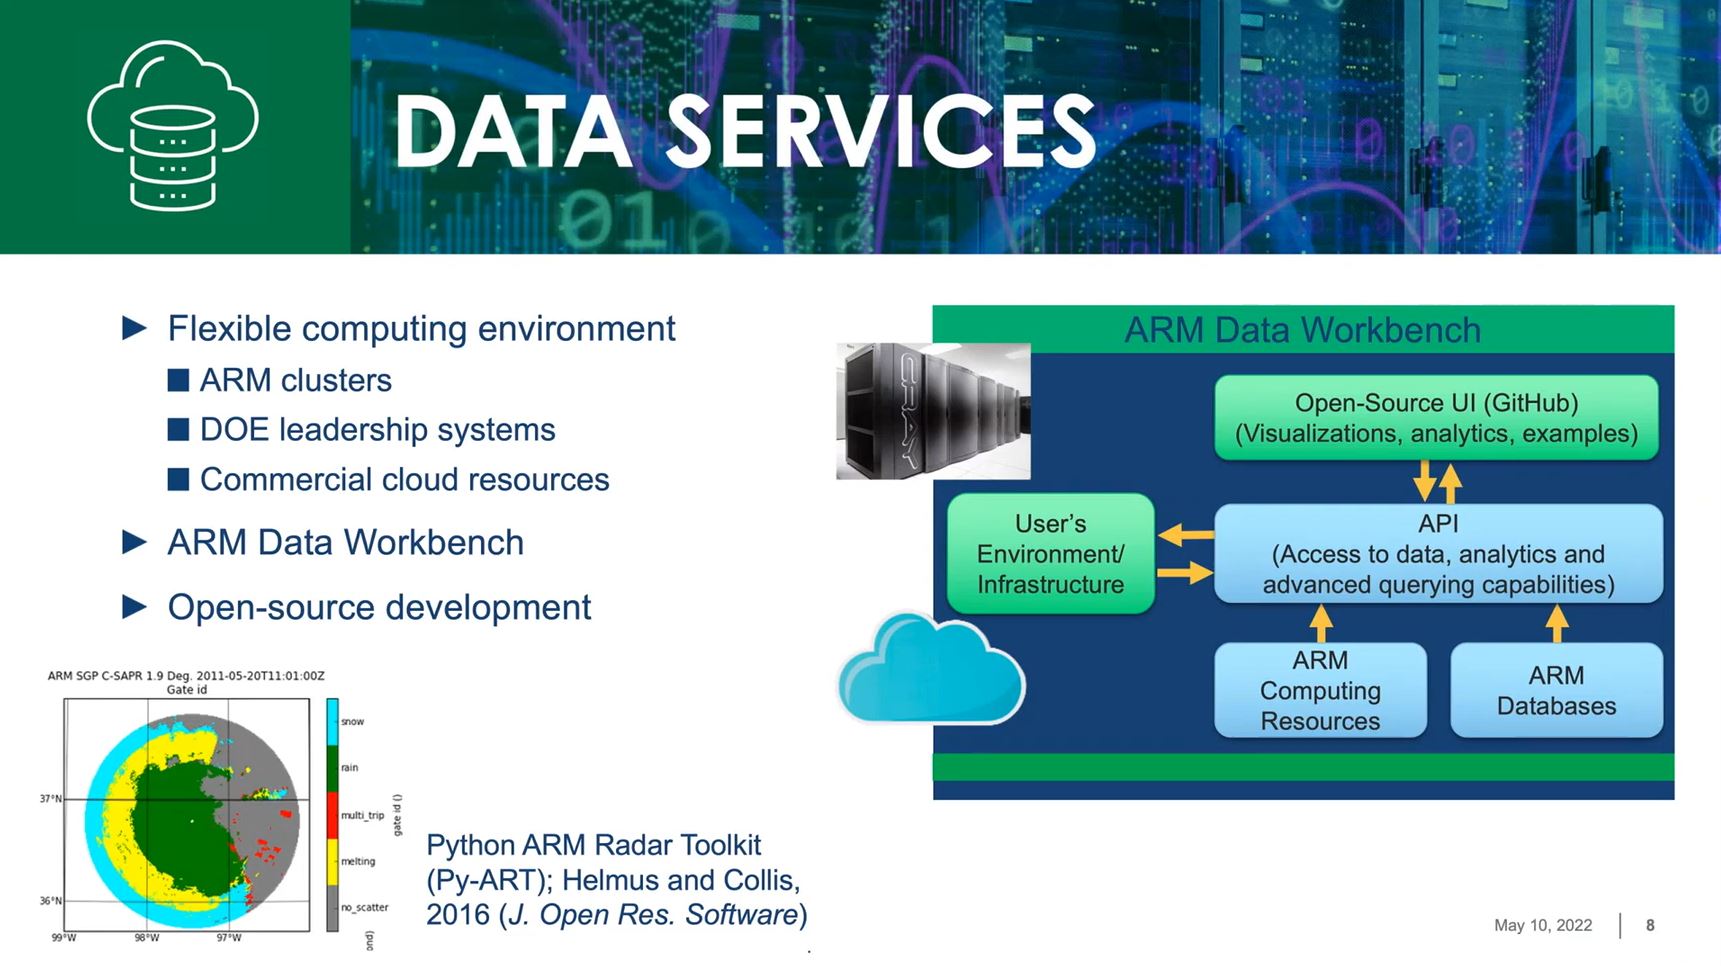 A screenshot of the Decadal Vision Data Services slide lists the following bullet points: "flexible computing environment" with "ARM clusters, DOE leadership systems, and commercial cloud resources" underneath; "ARM Data Workbench;" and "open-source development."